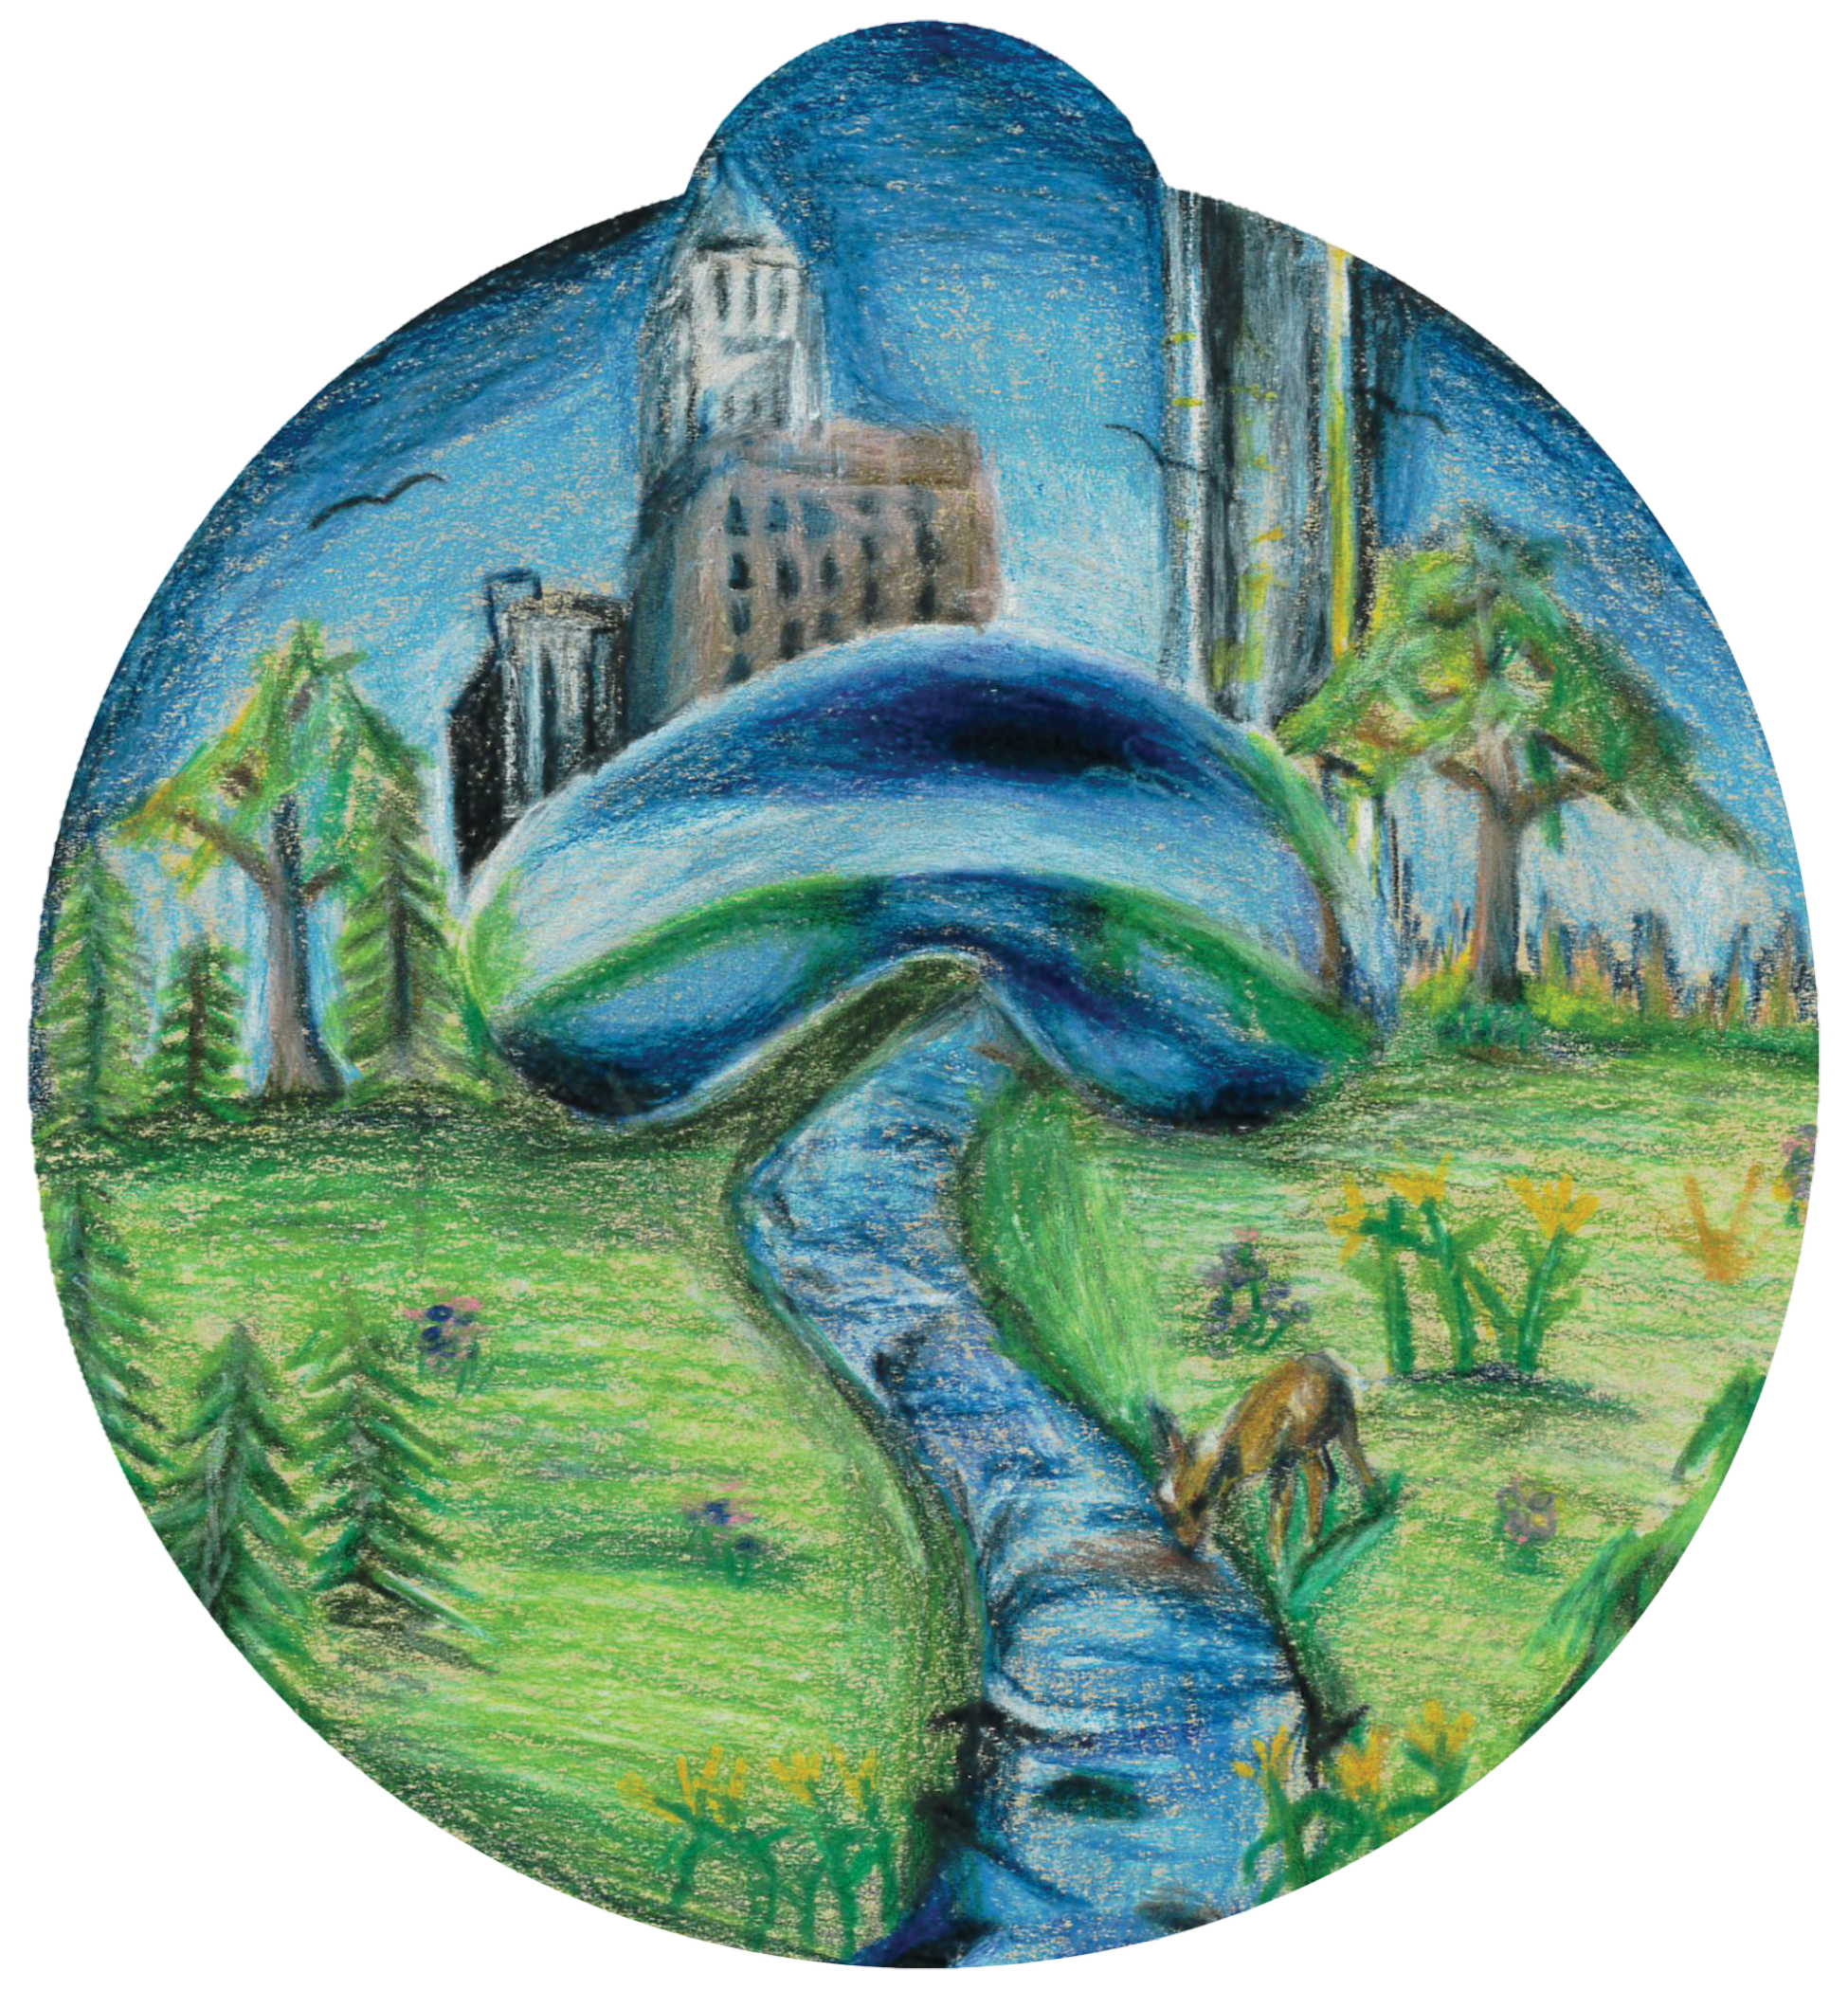 ornament depicting a river running under a silver bean, set against the backdrop of the Chicago skyline